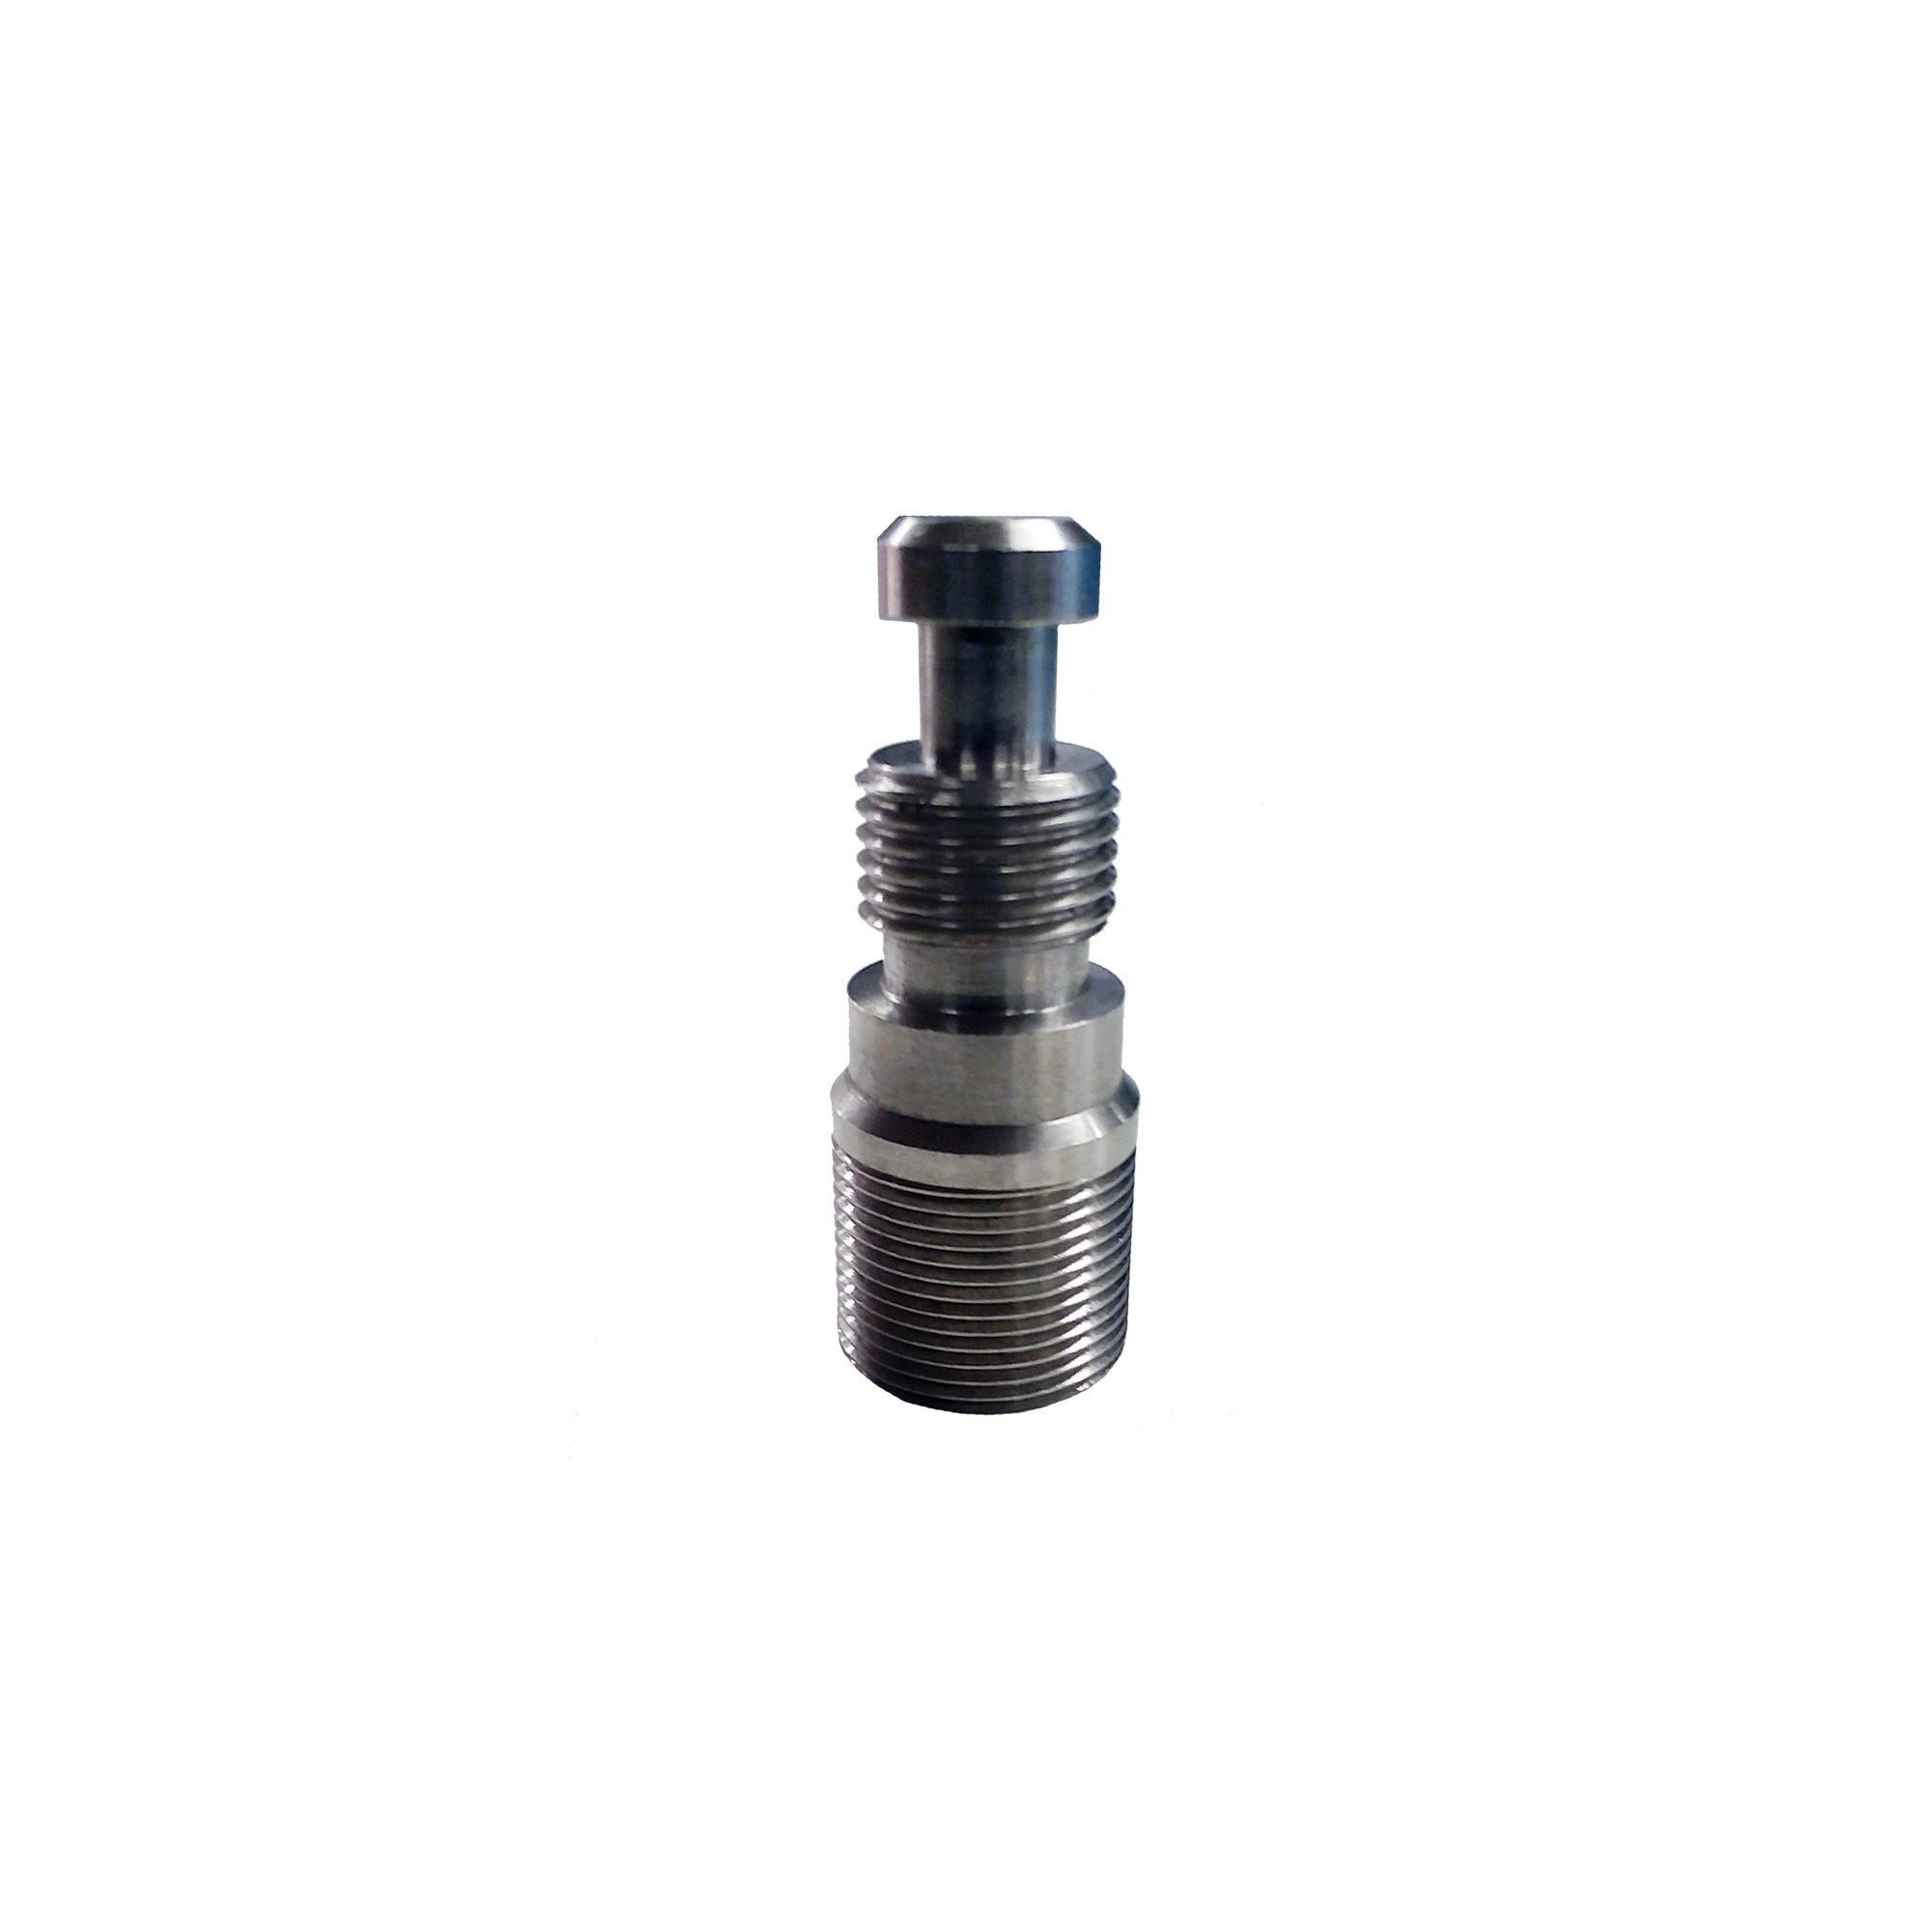 【16232】REPLACEMENT 5/8-27 MIC STUD FOR